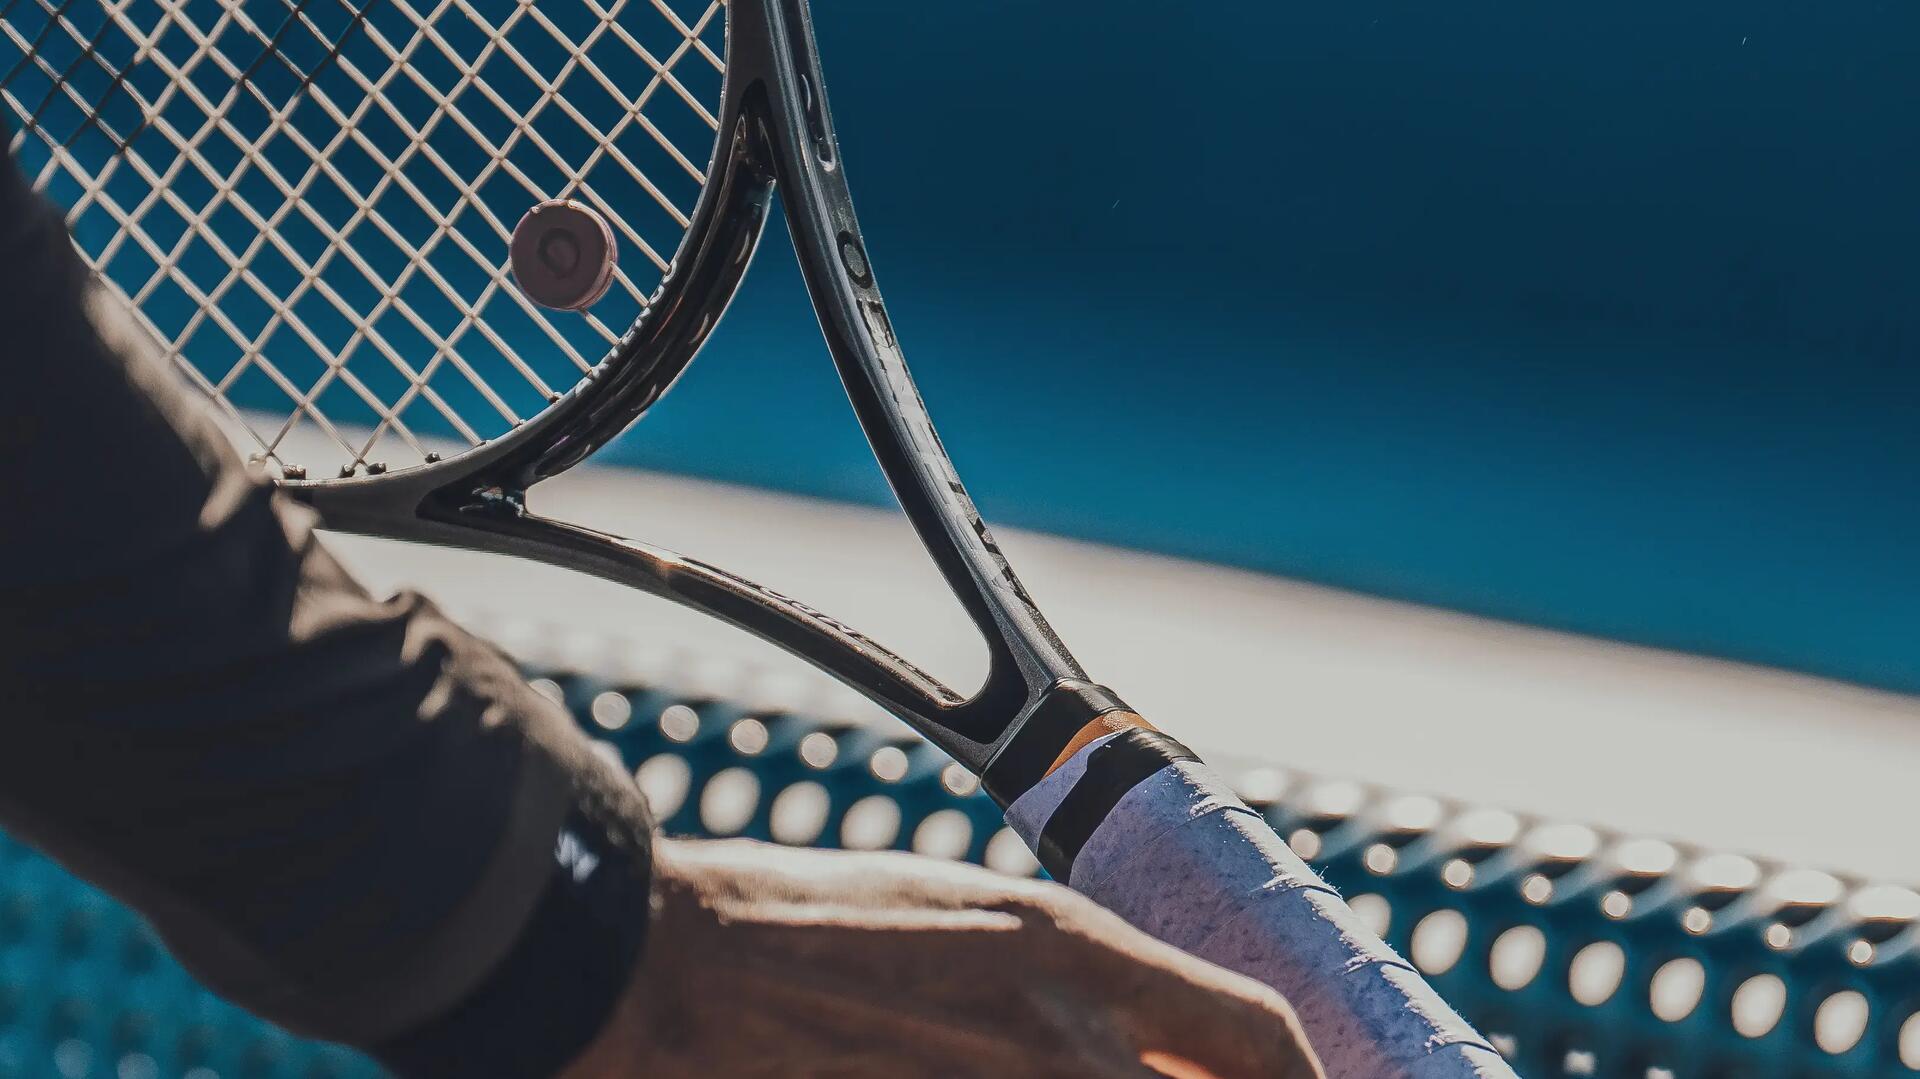 What is the correct string tension for a tennis racket?